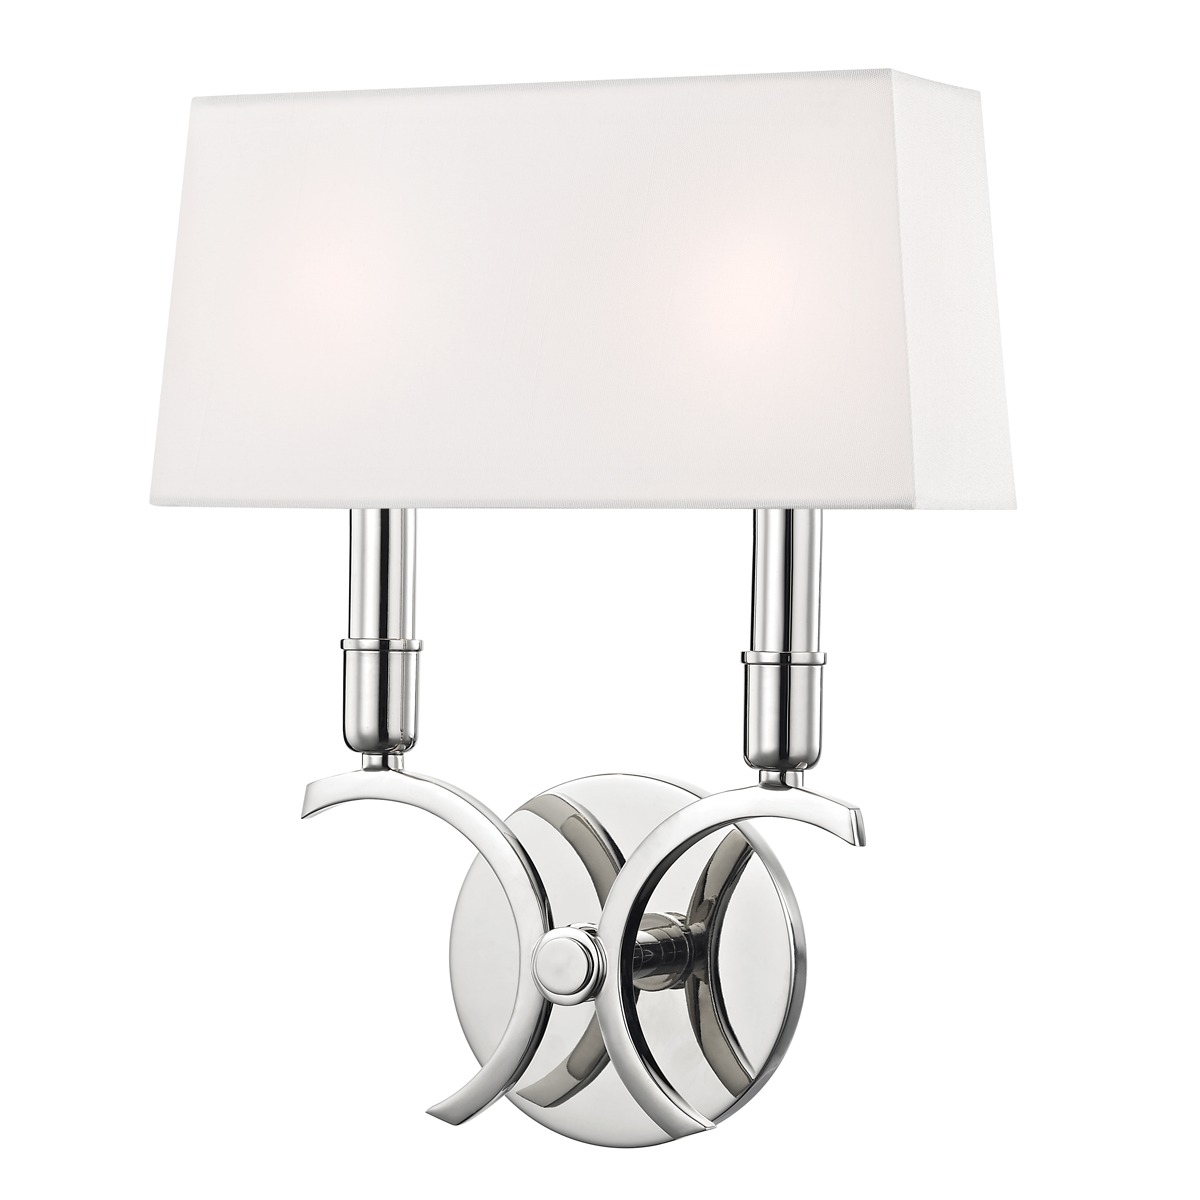 Hudson Valley Lighting Gwen Wall Sconce with Polished Steel